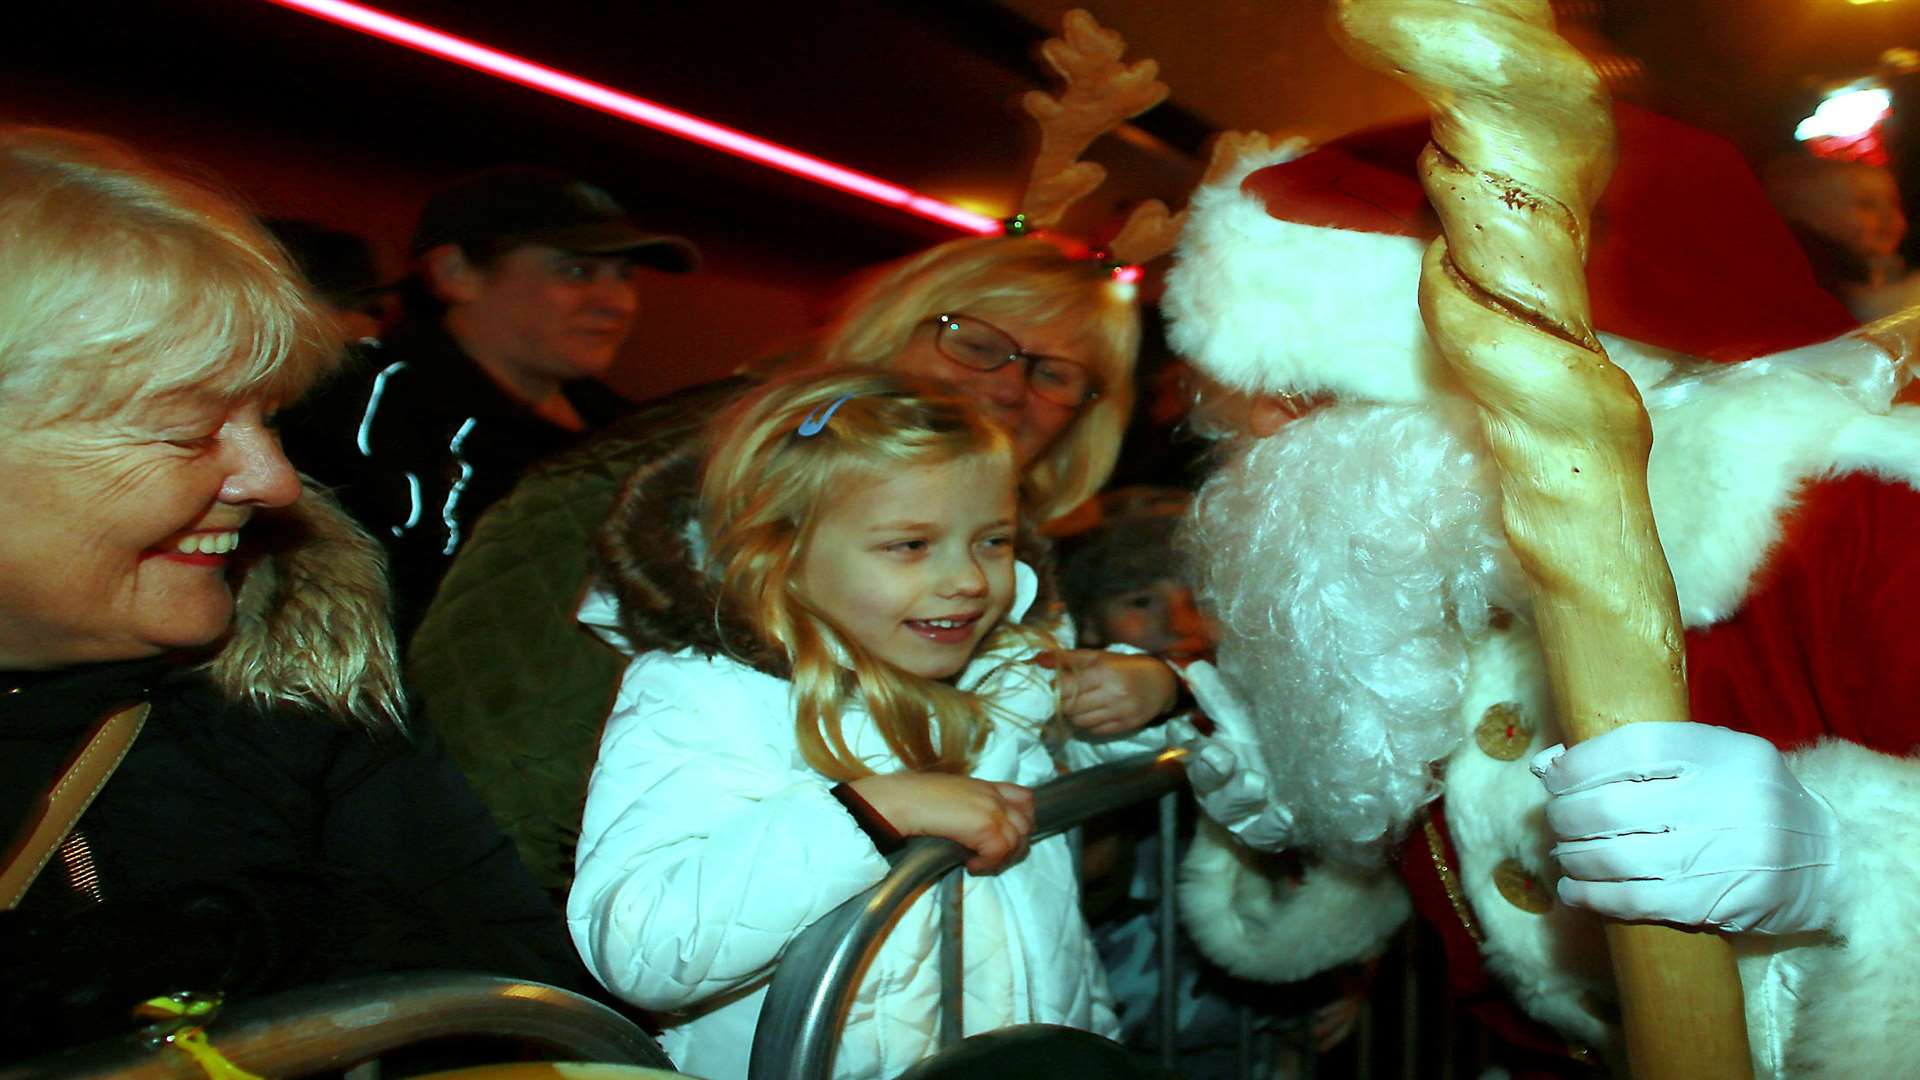 Last year's event featured Father Christmas